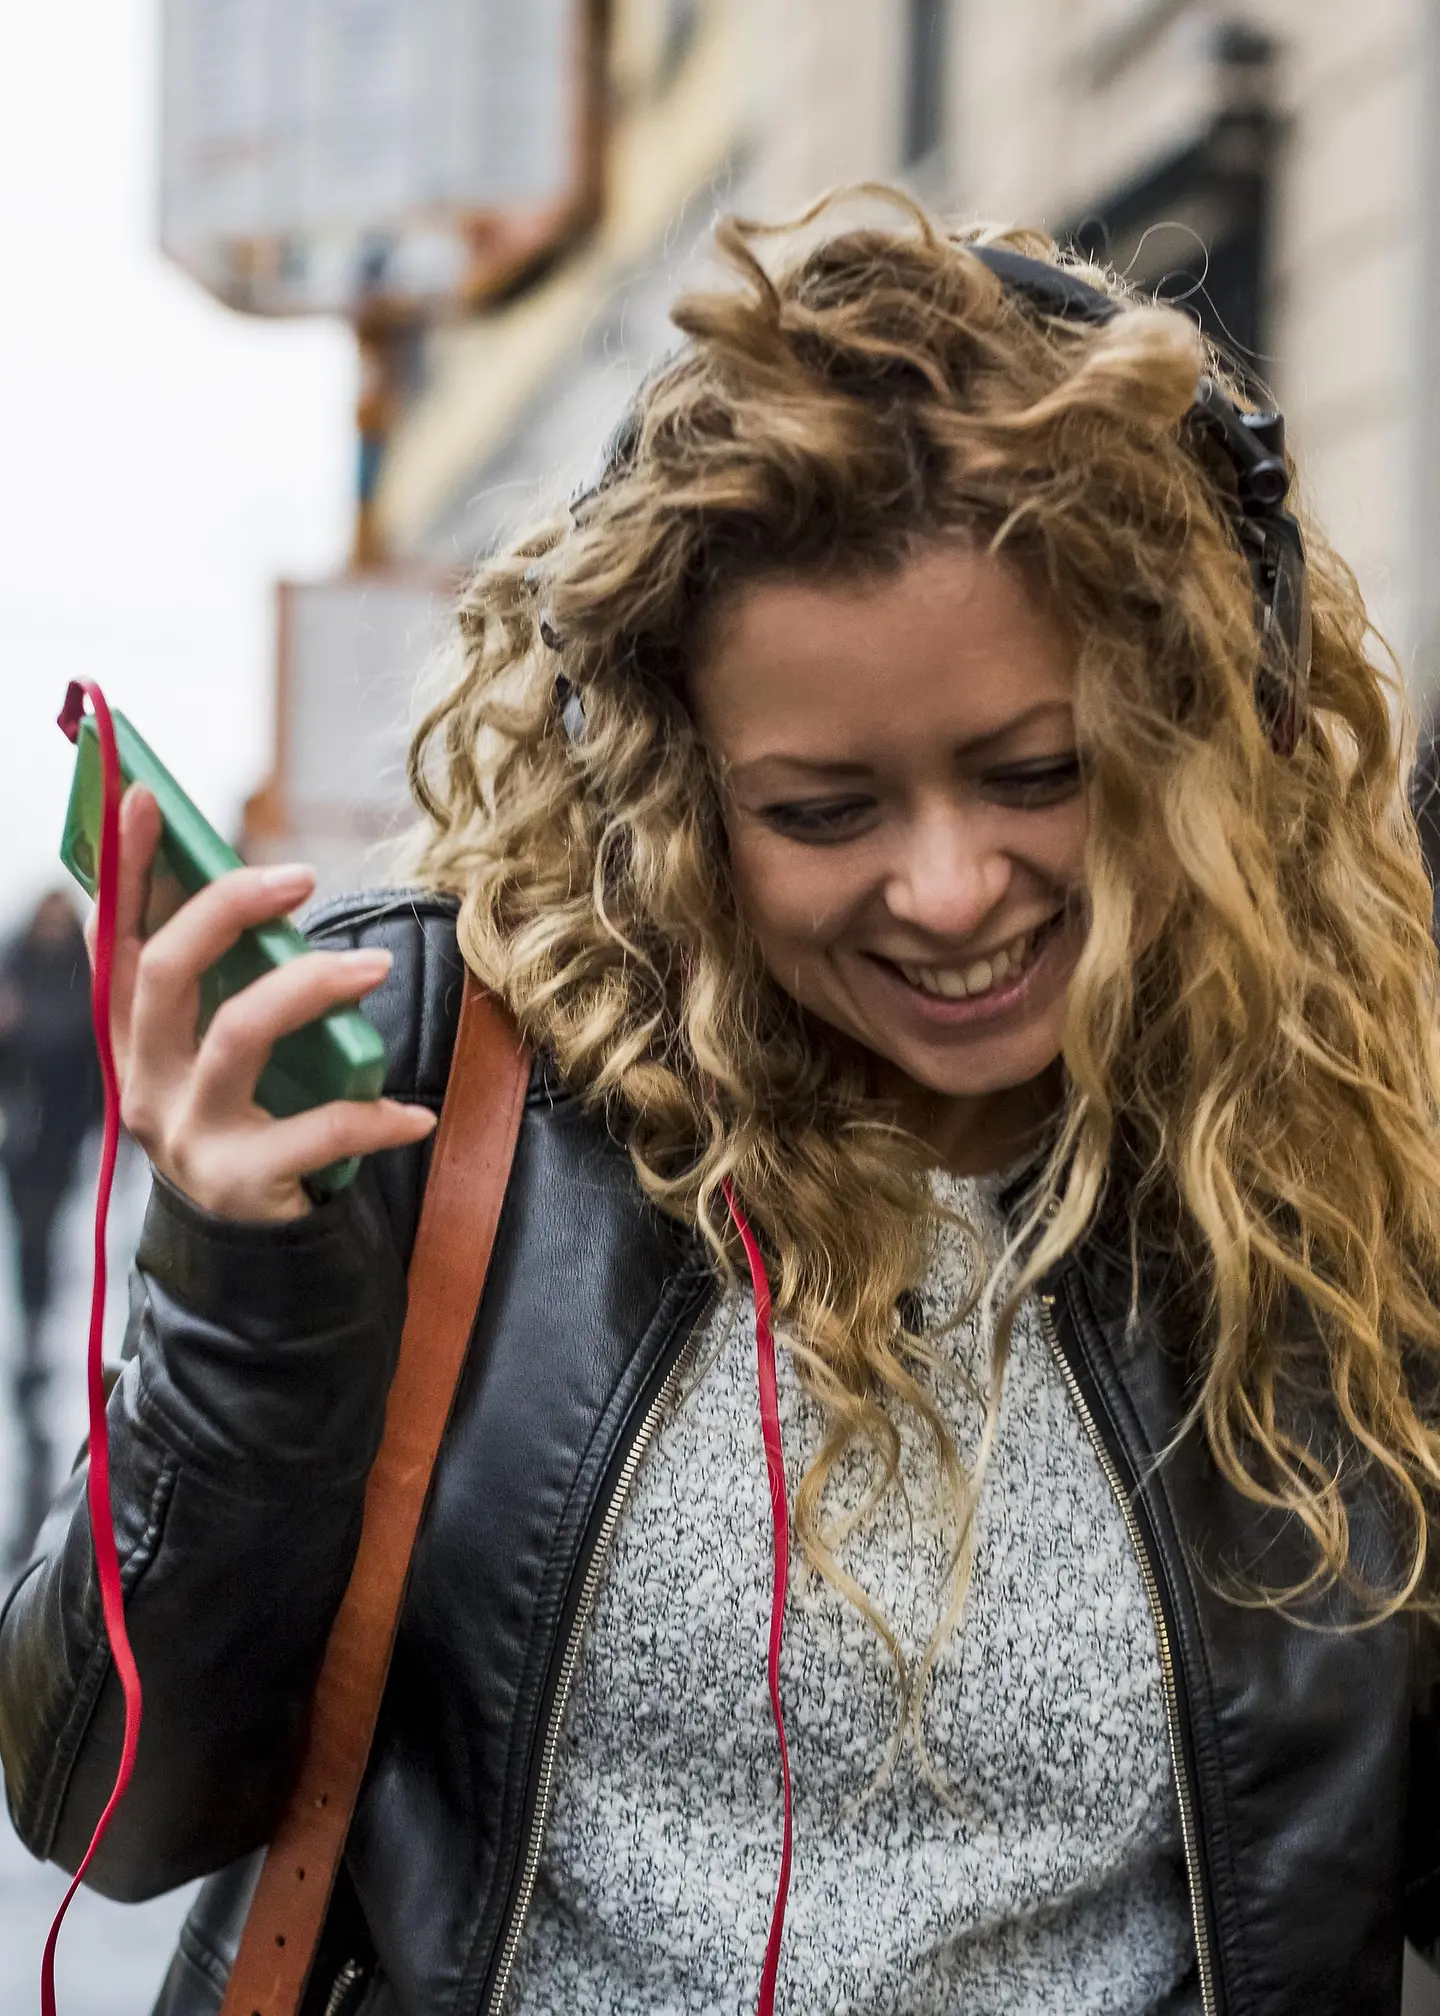 A young woman walks through the street laughing and listening to music on her cell phone.